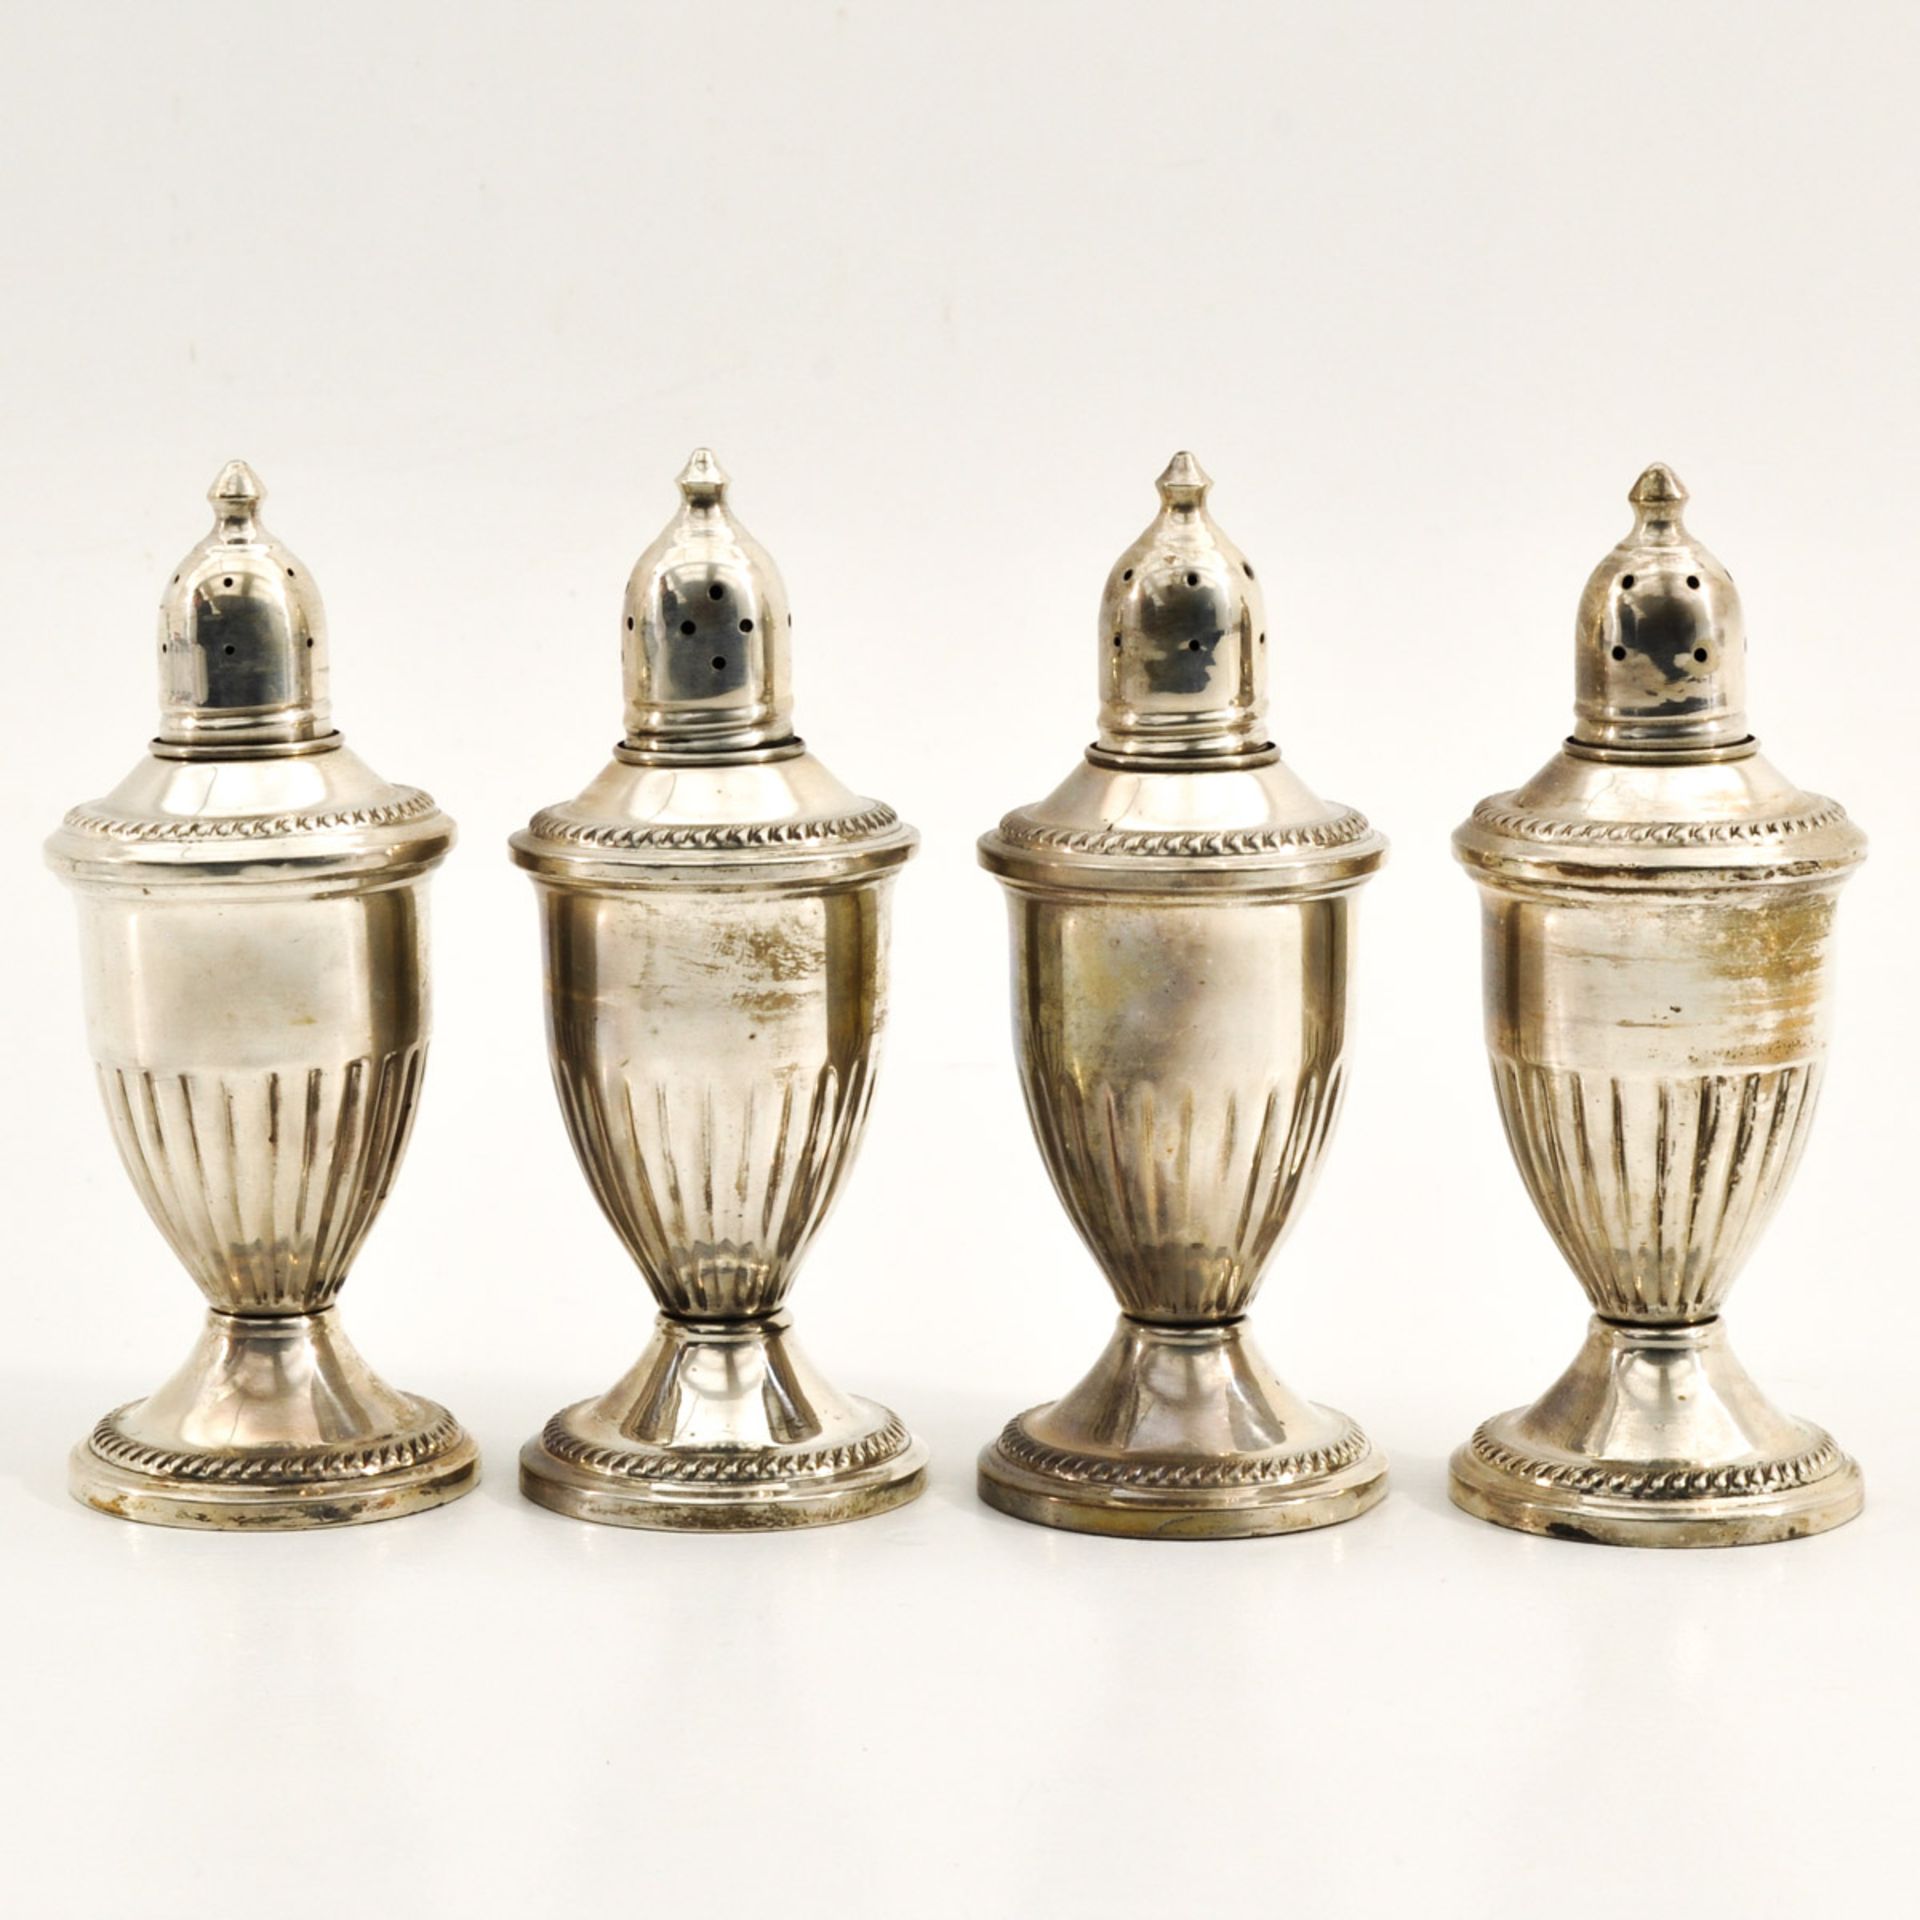 A Collection of 4 Silver Castors